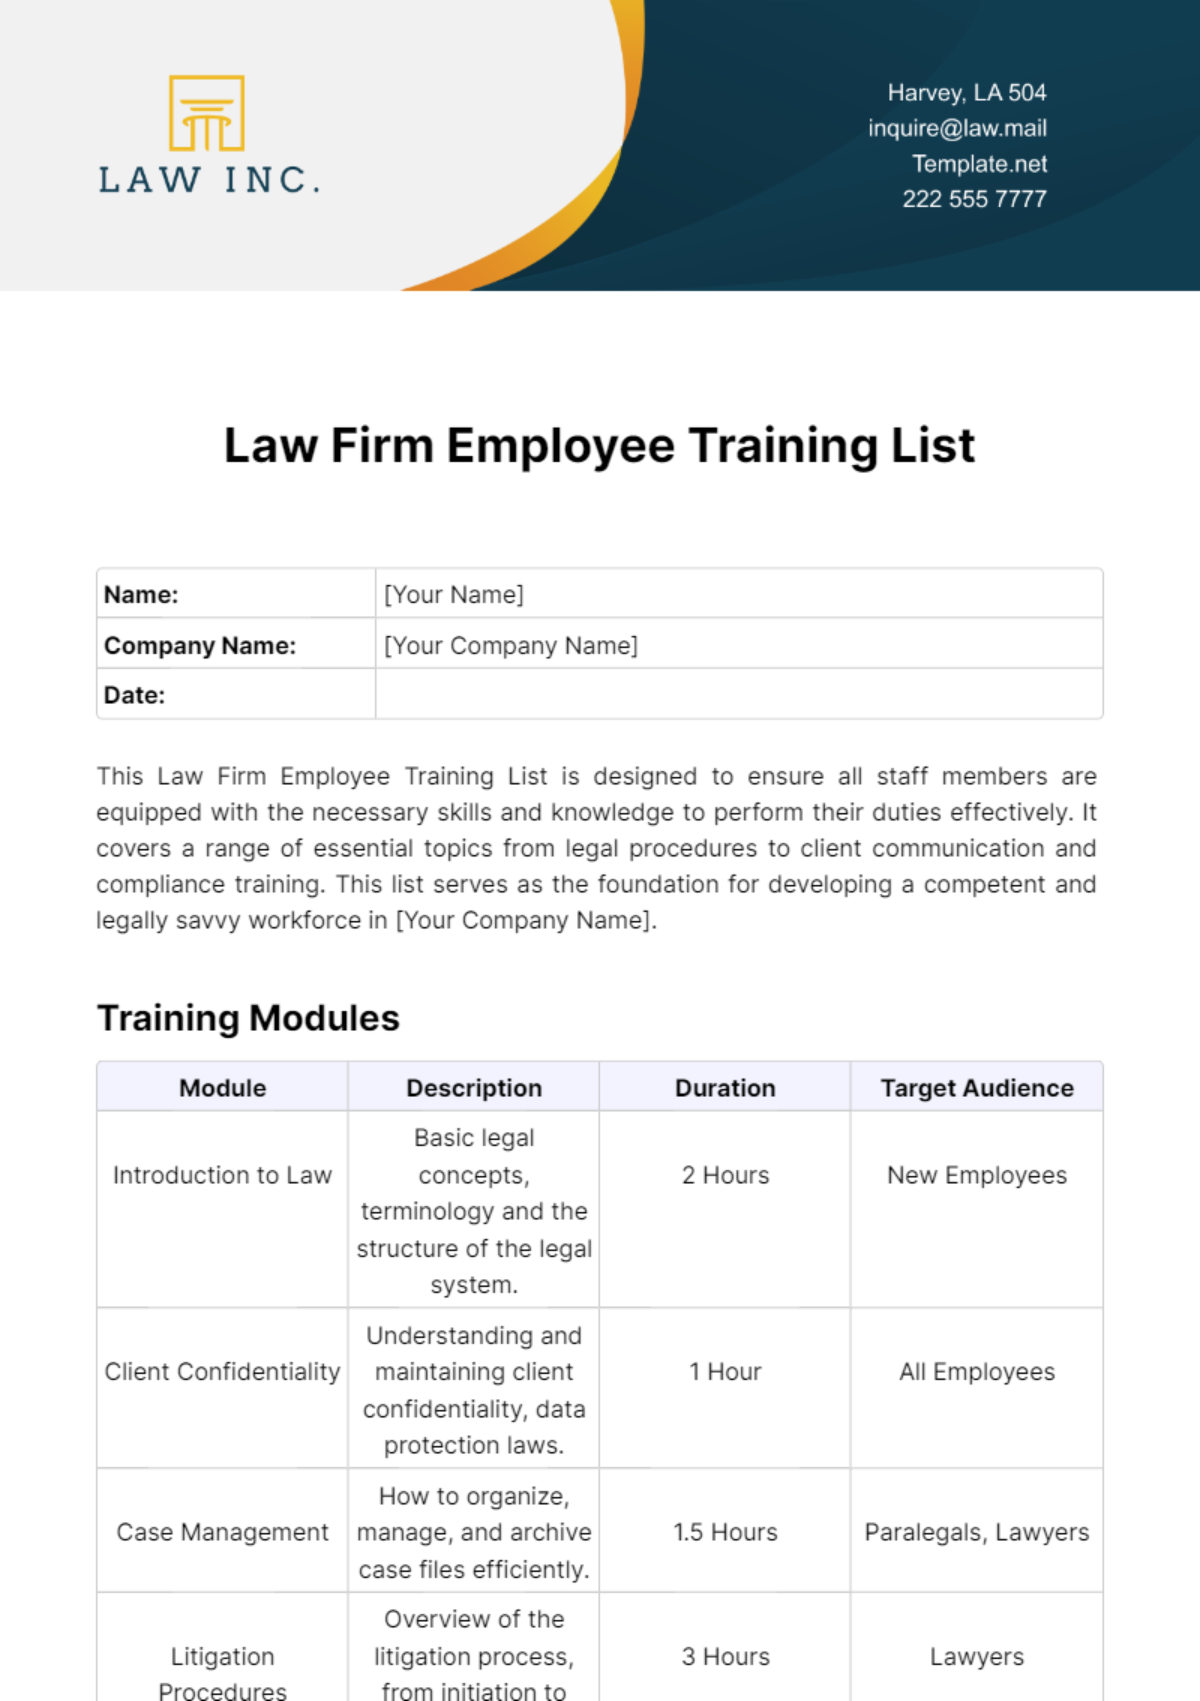 Law Firm Employee Training List Template